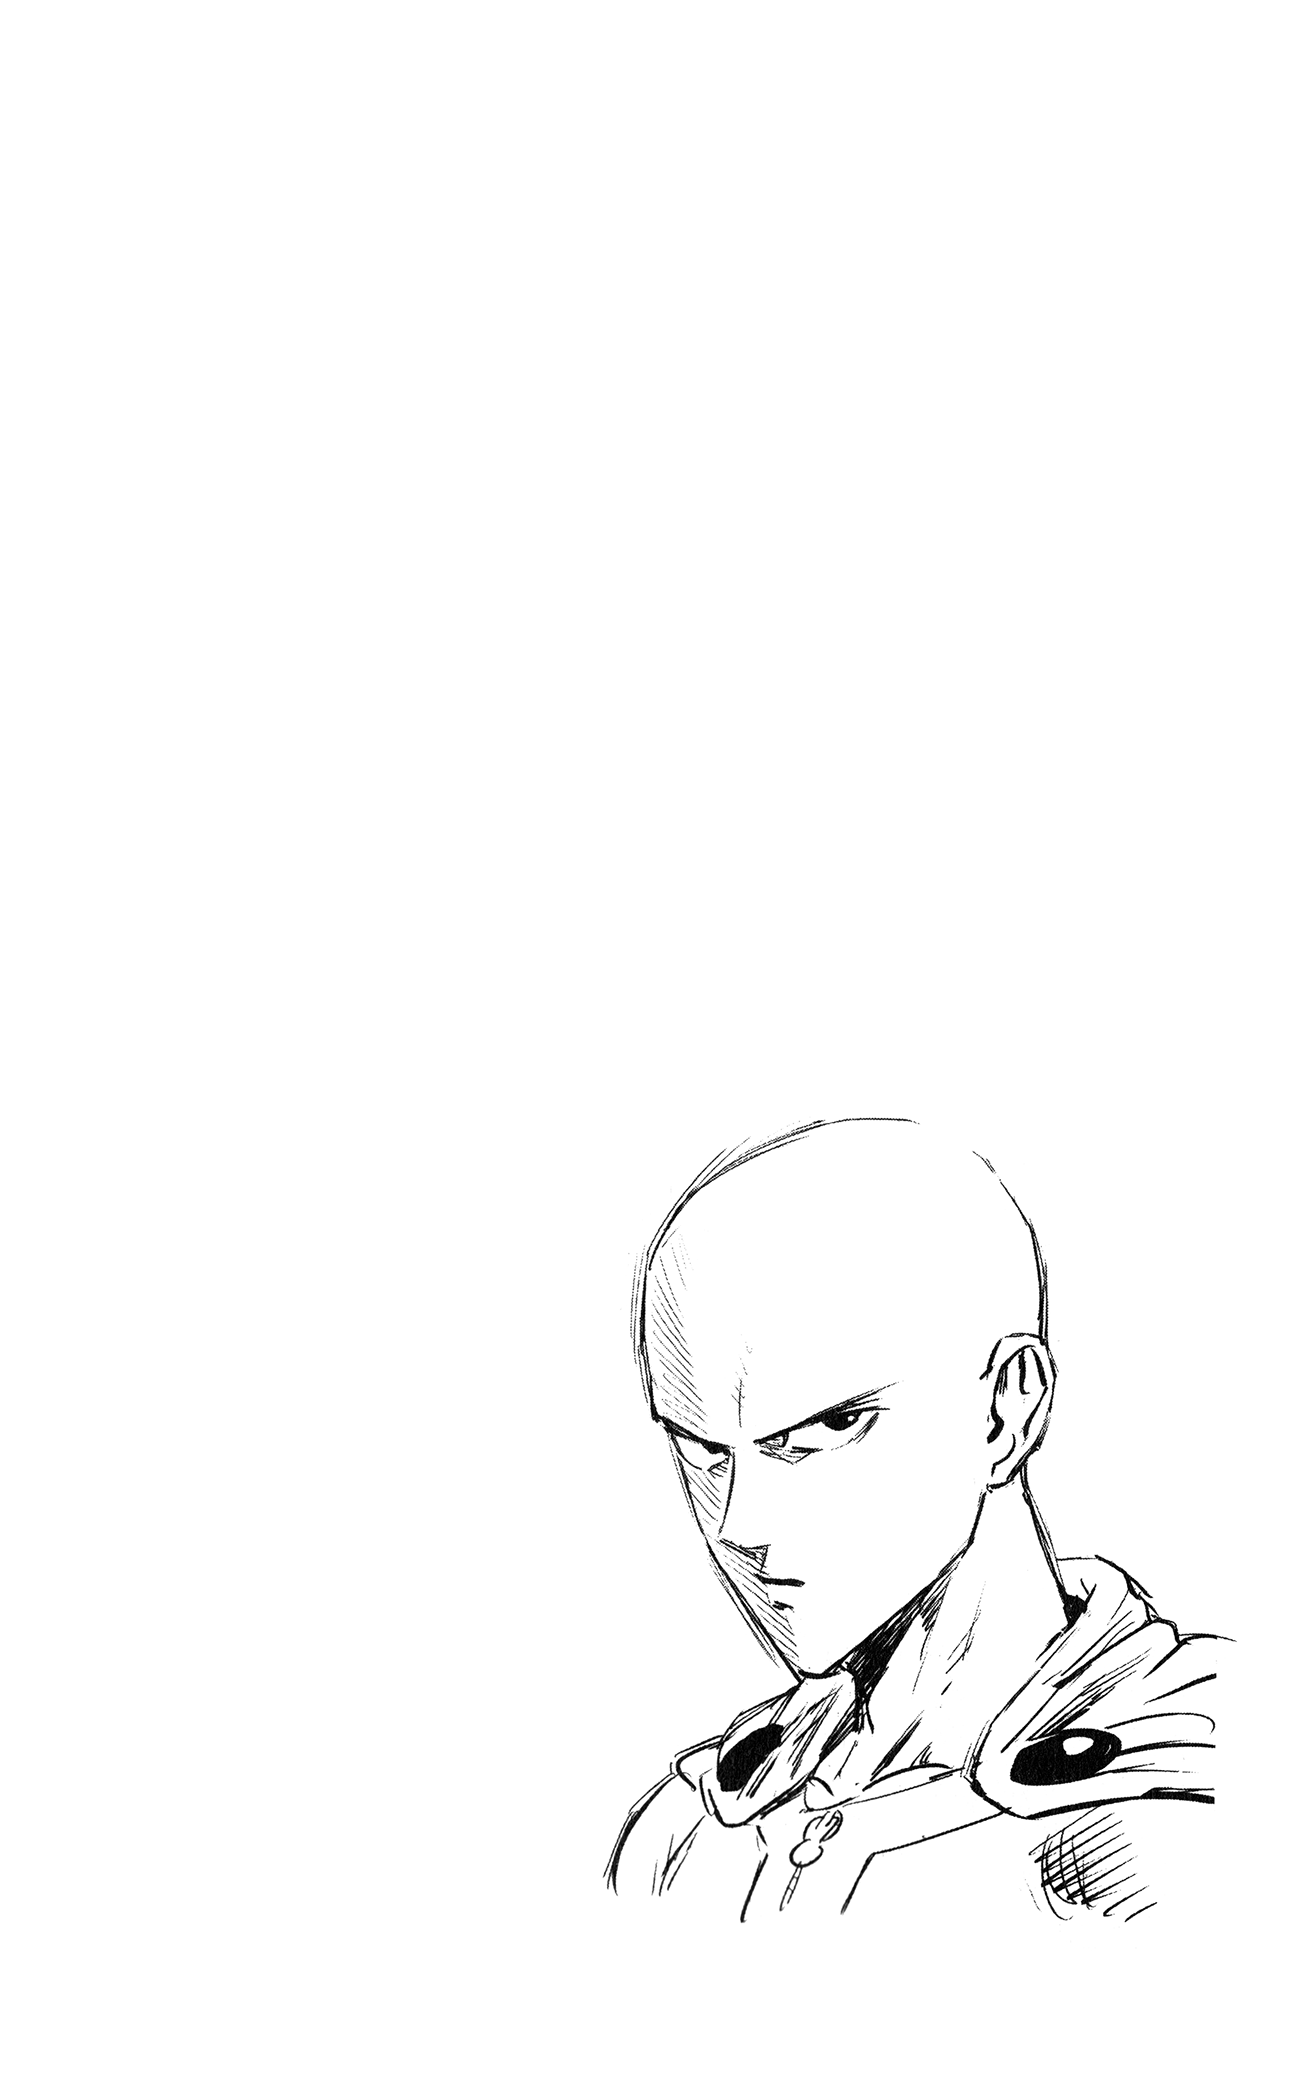 One Punch Man, Chapter 163.5 Back of My Head  Volume 25 Extras image 11